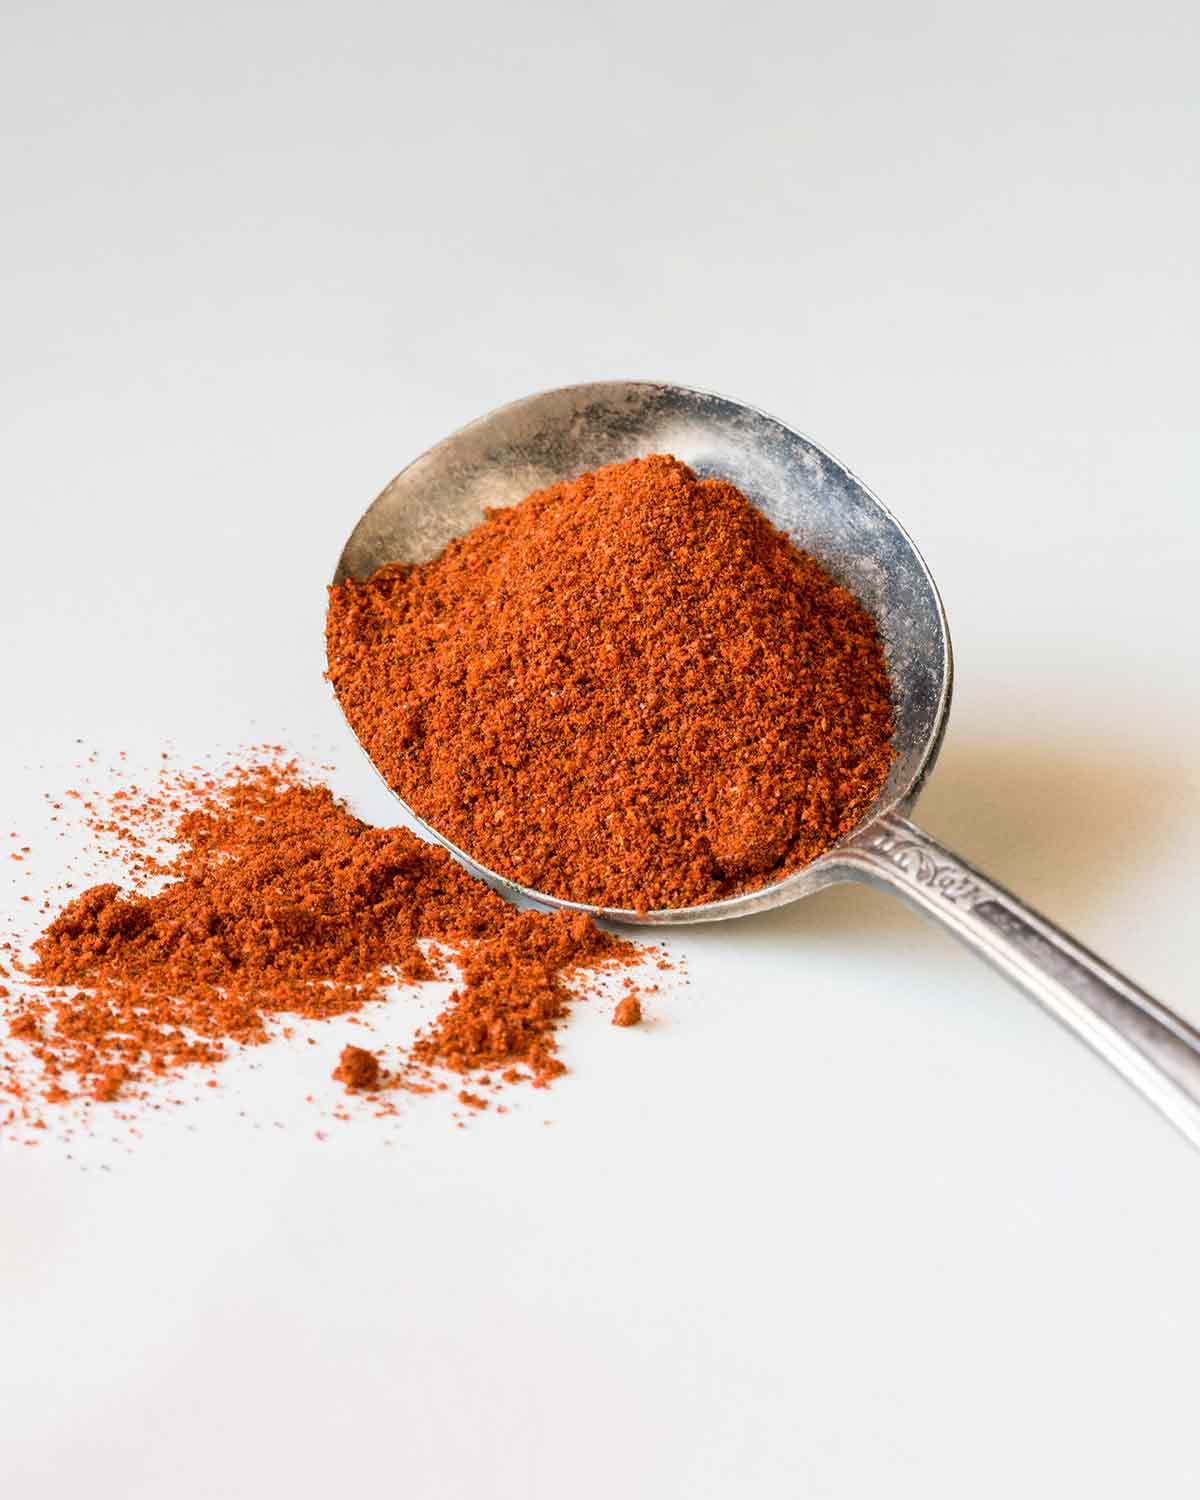 A spoonful of dried chile powder.